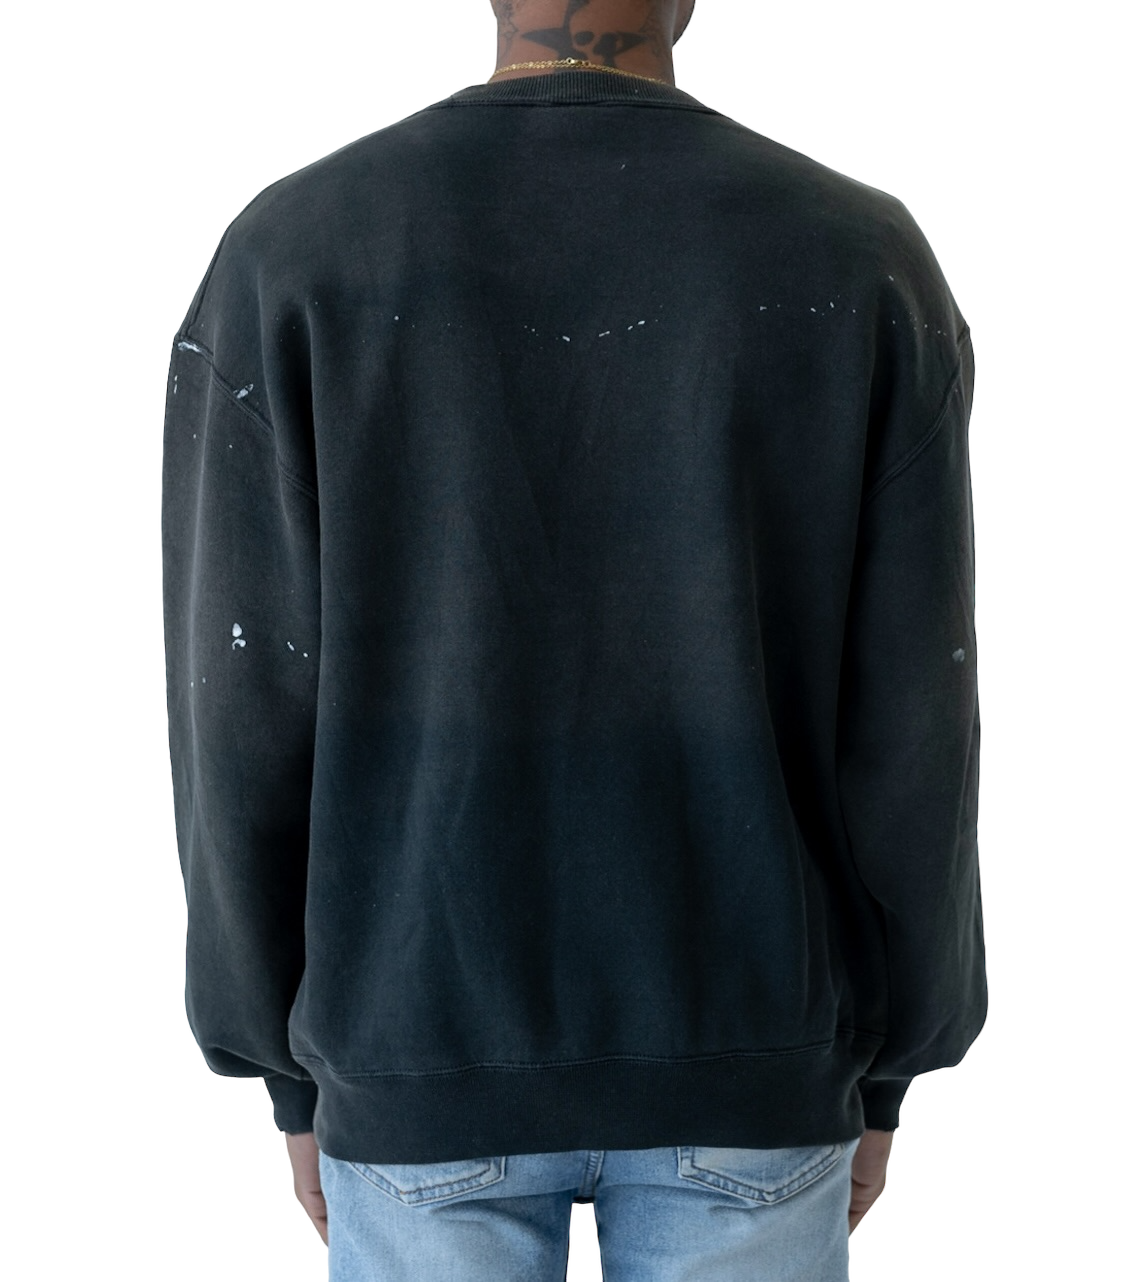 SUN FADED / THRASHED BLACK RUSSELL CREWNECK - 1990's